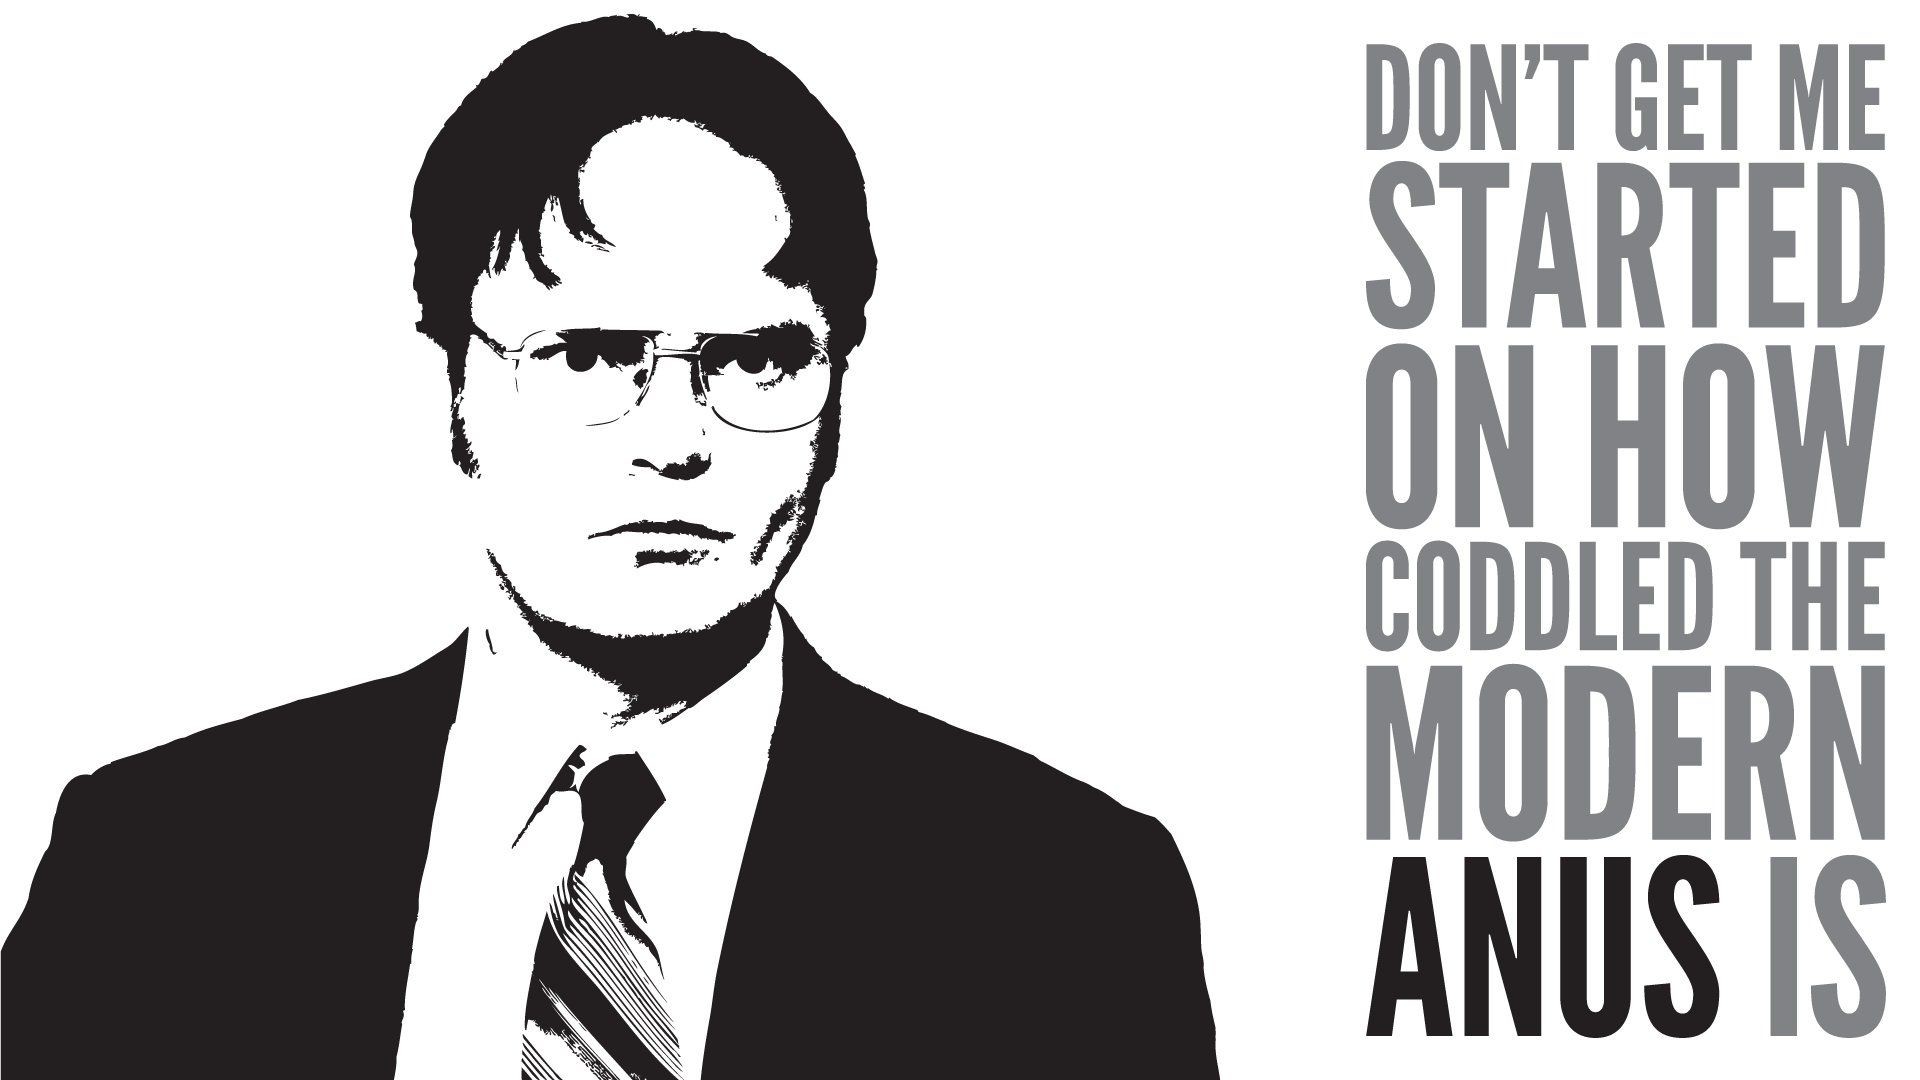 dwight schrute wallpaper,cartoon,font,illustration,white collar worker,black and white